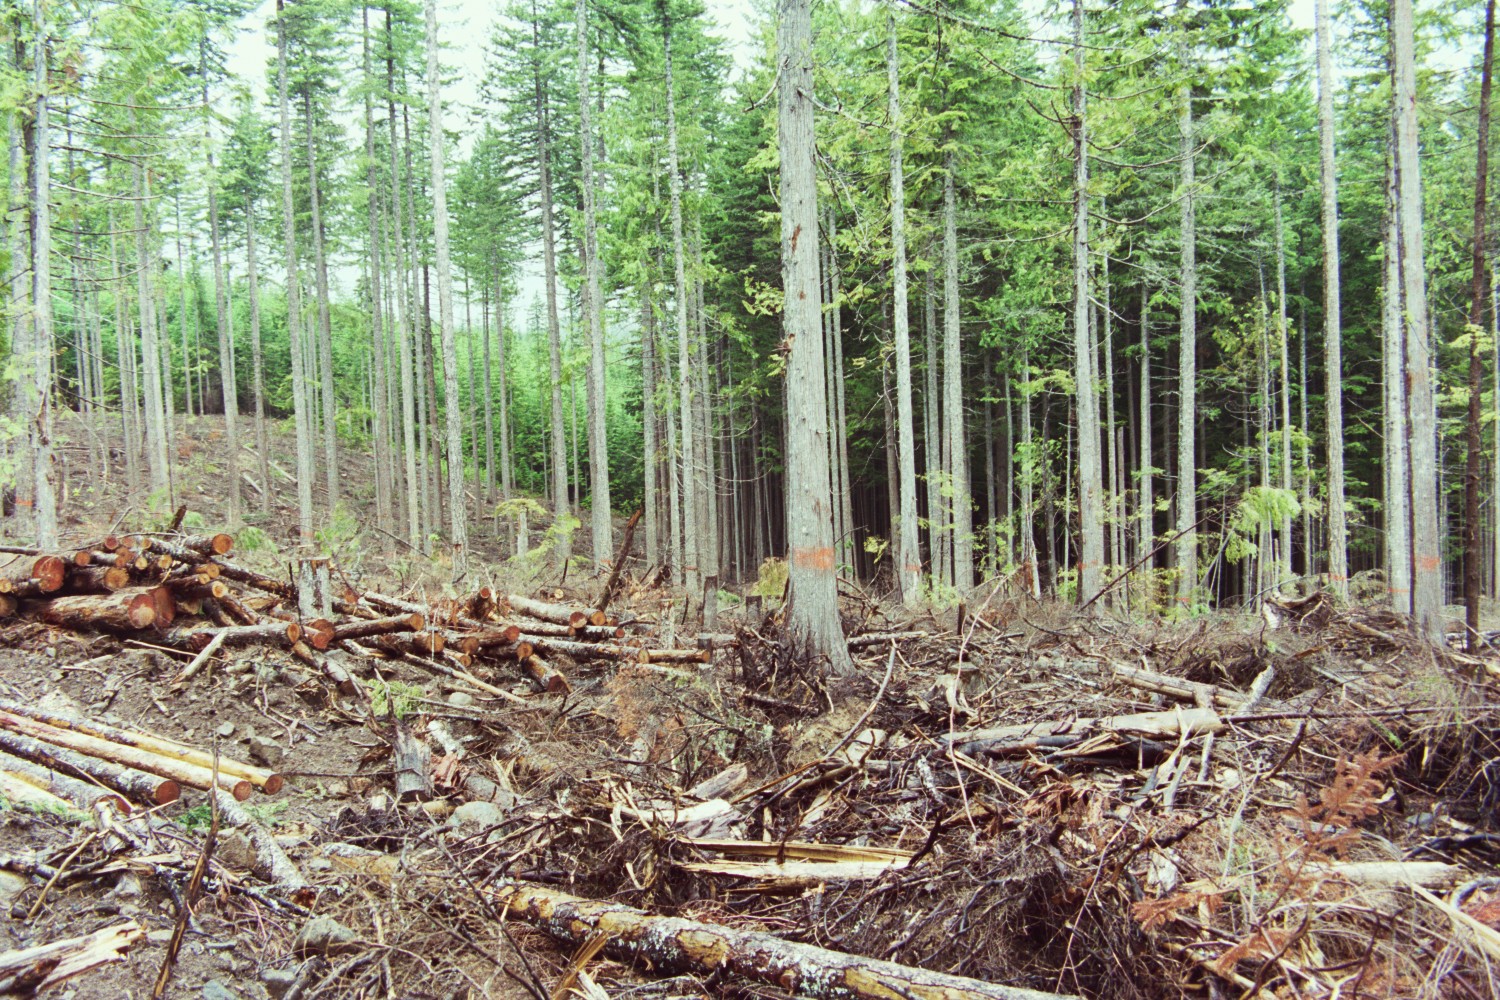 In the background, there are even age trees only growing in their canopy. In the front of those trees there is a slash pile of cut logs and woody material left from the timber harvest.